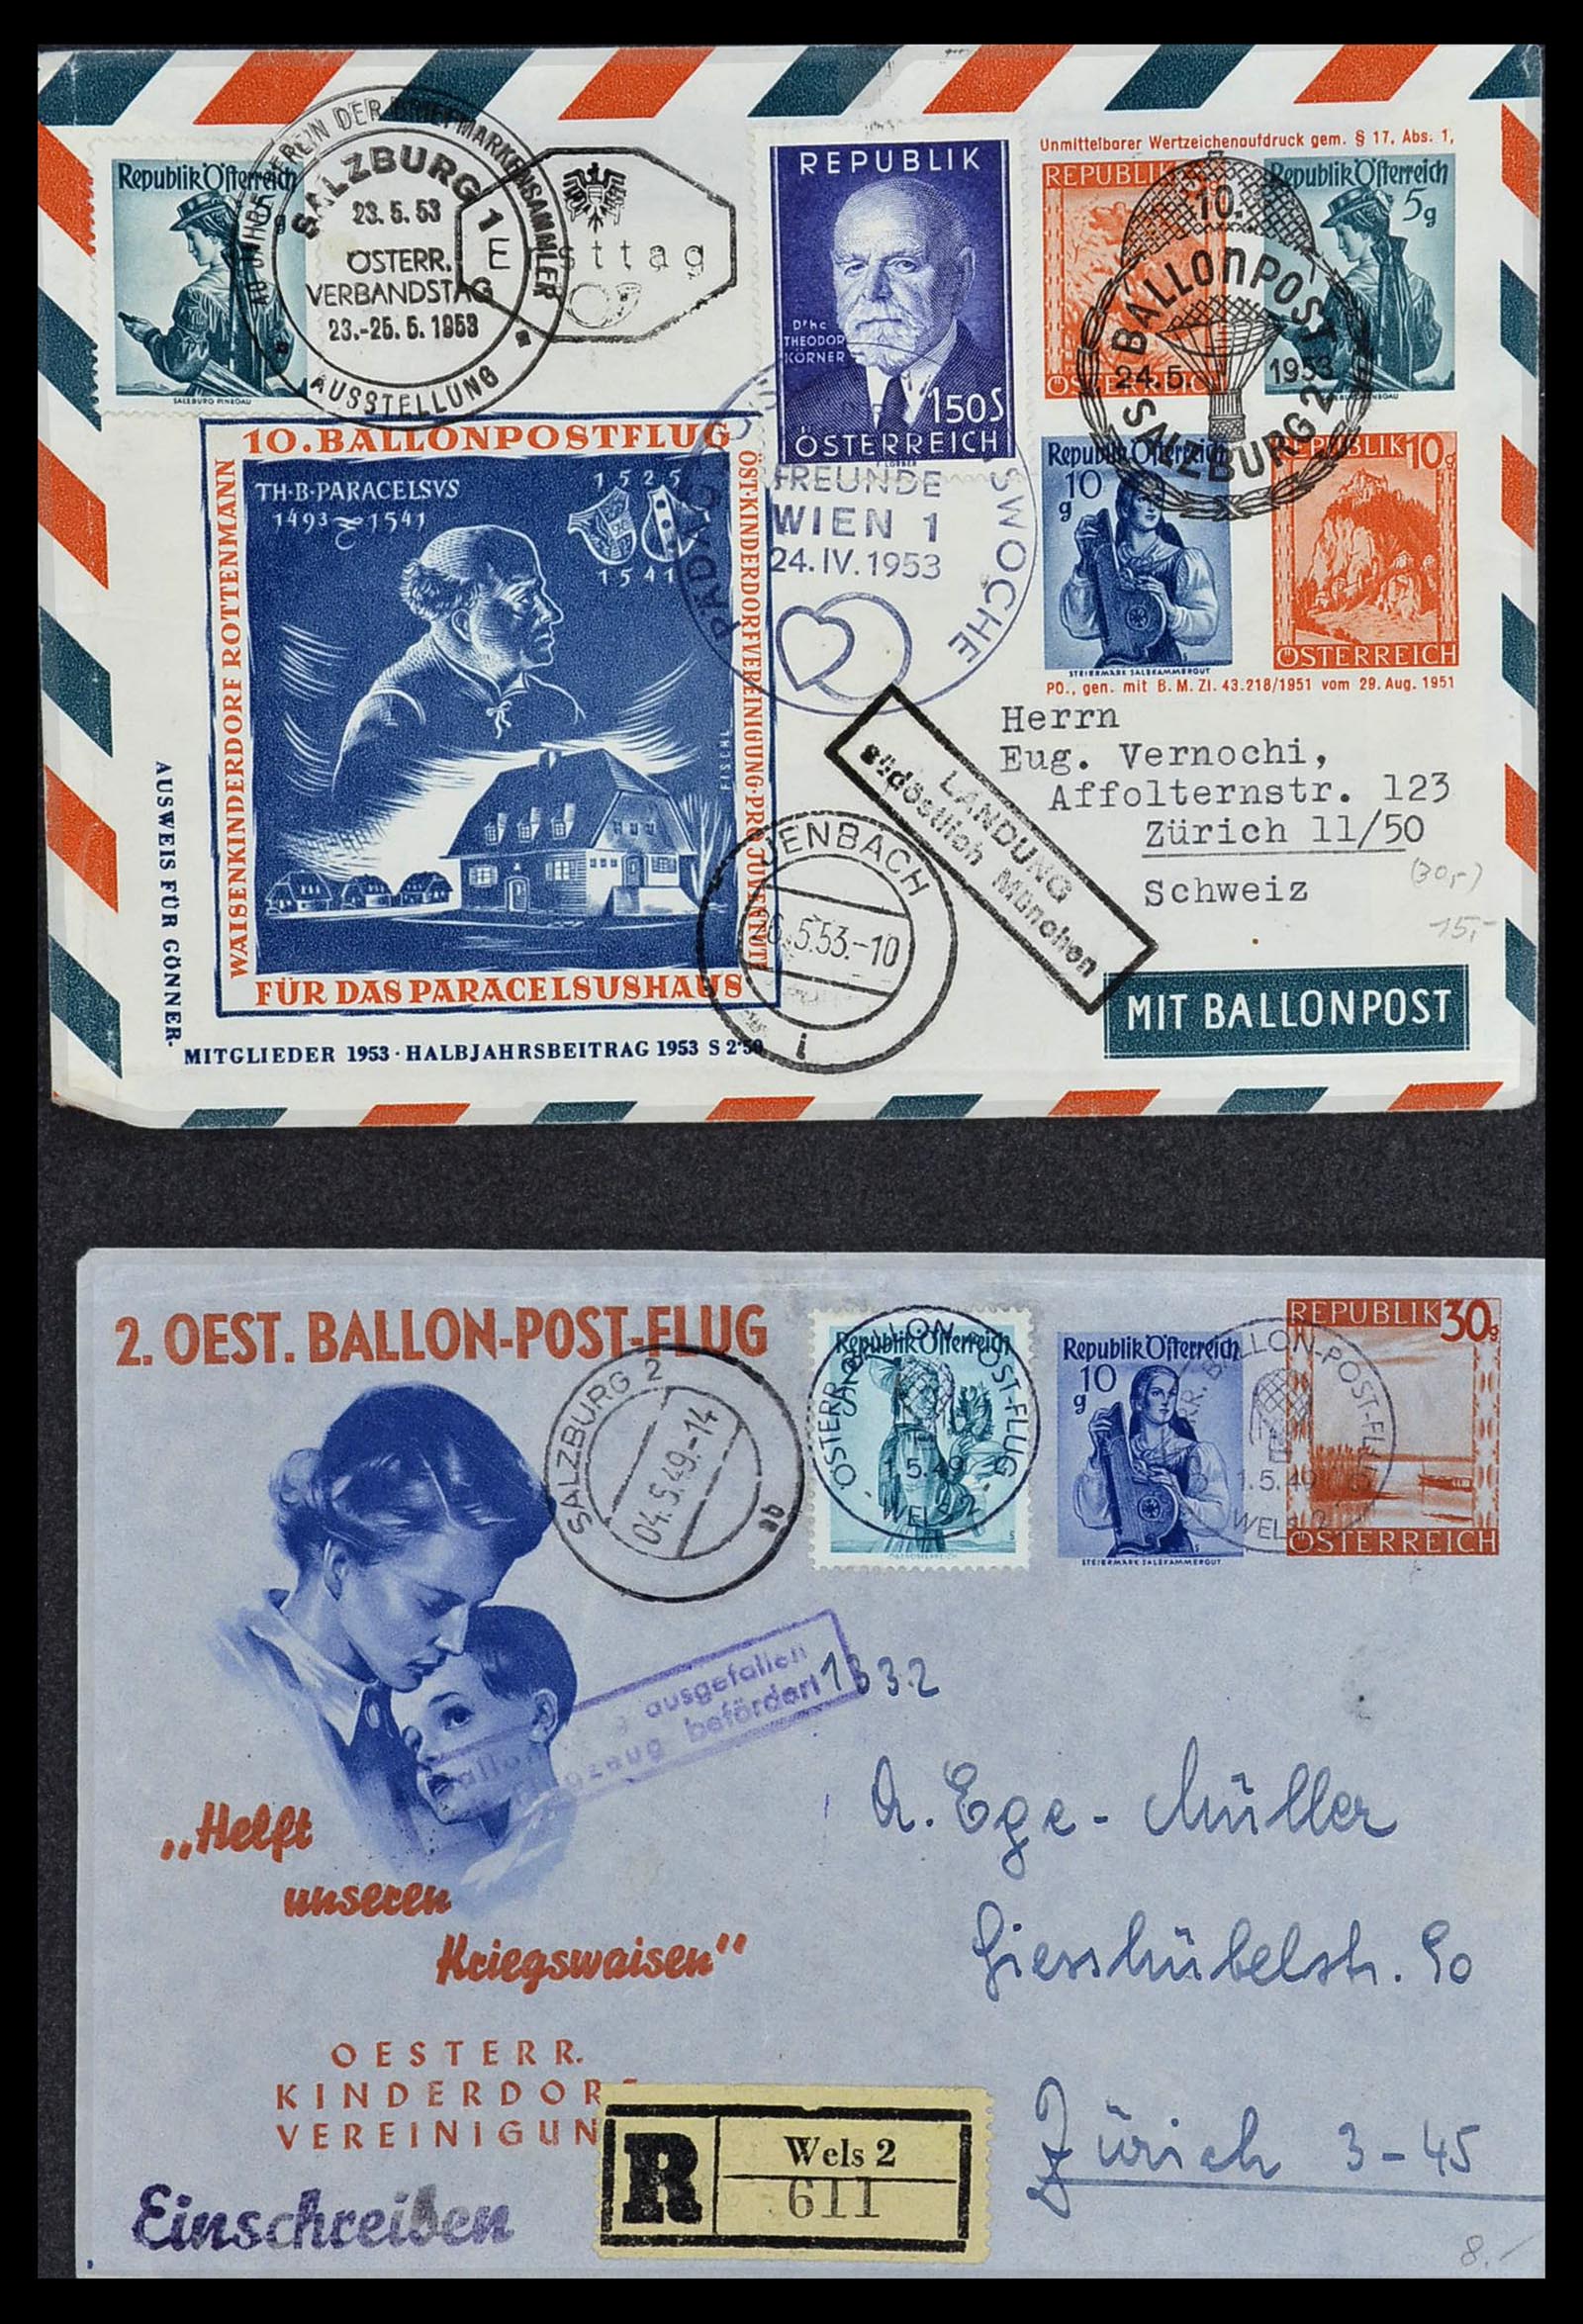 34141 117 - Stamp collection 34141 Switzerland airmail covers 1920-1960.